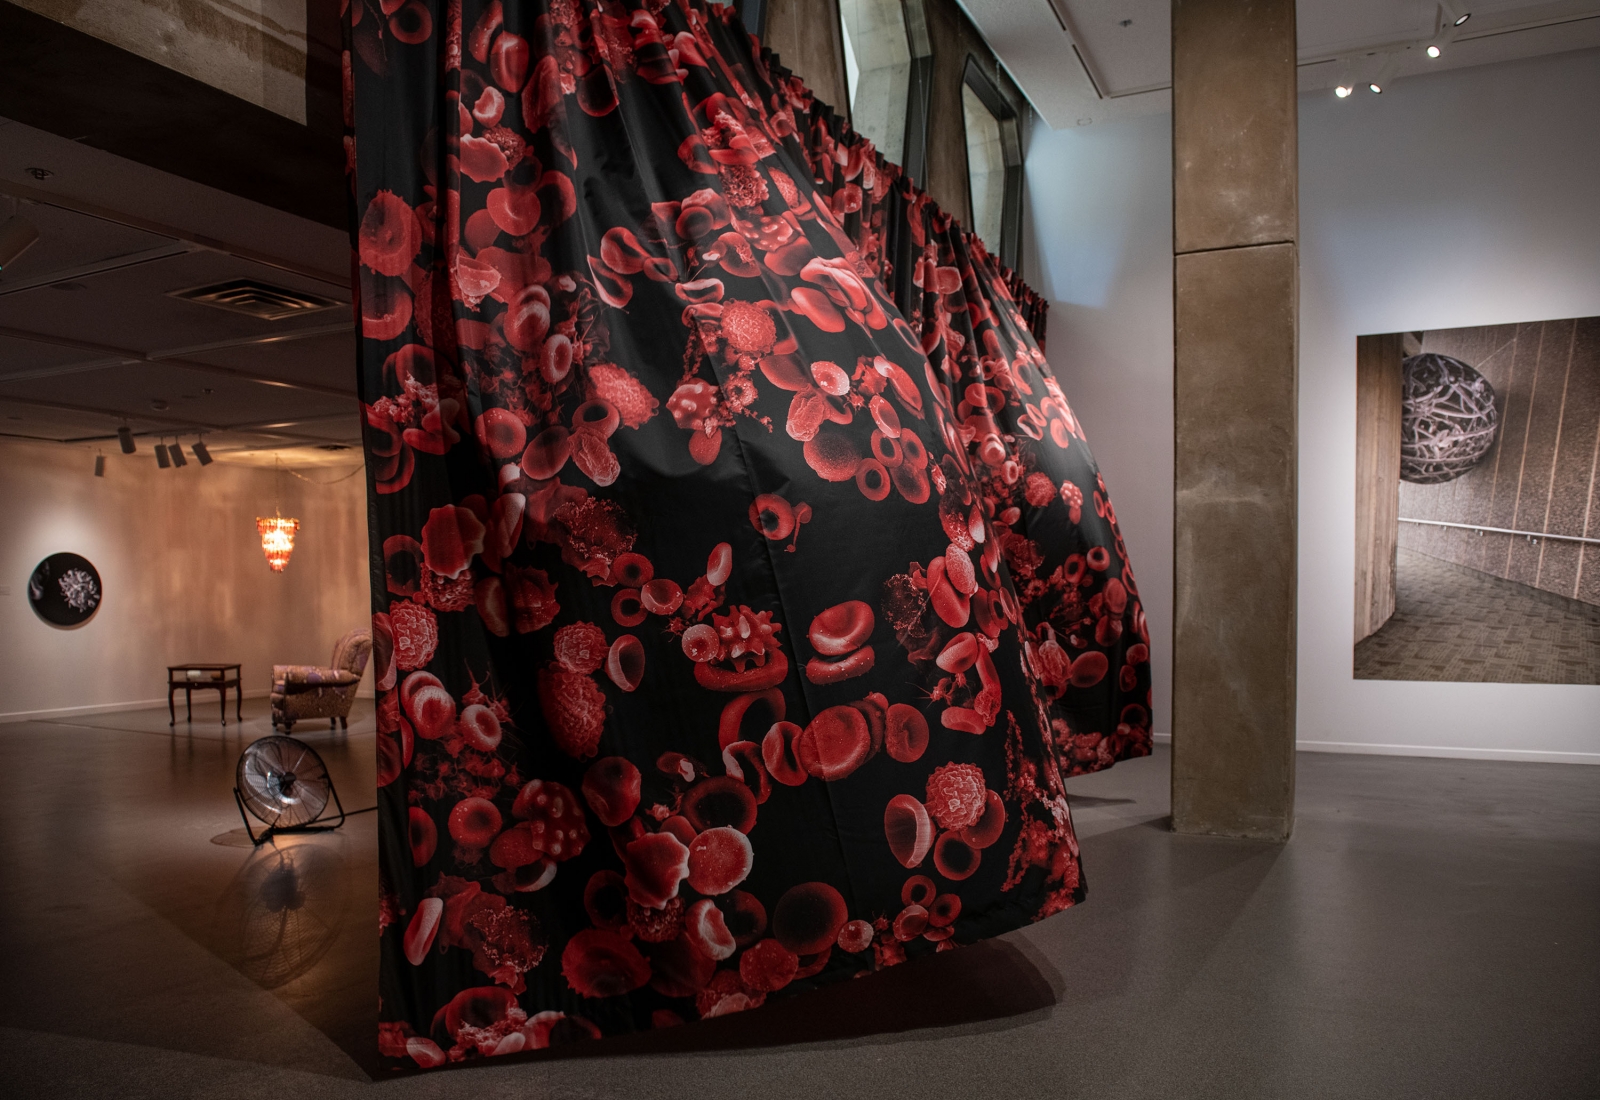 Billowing curtain made of black and red printed fabric.